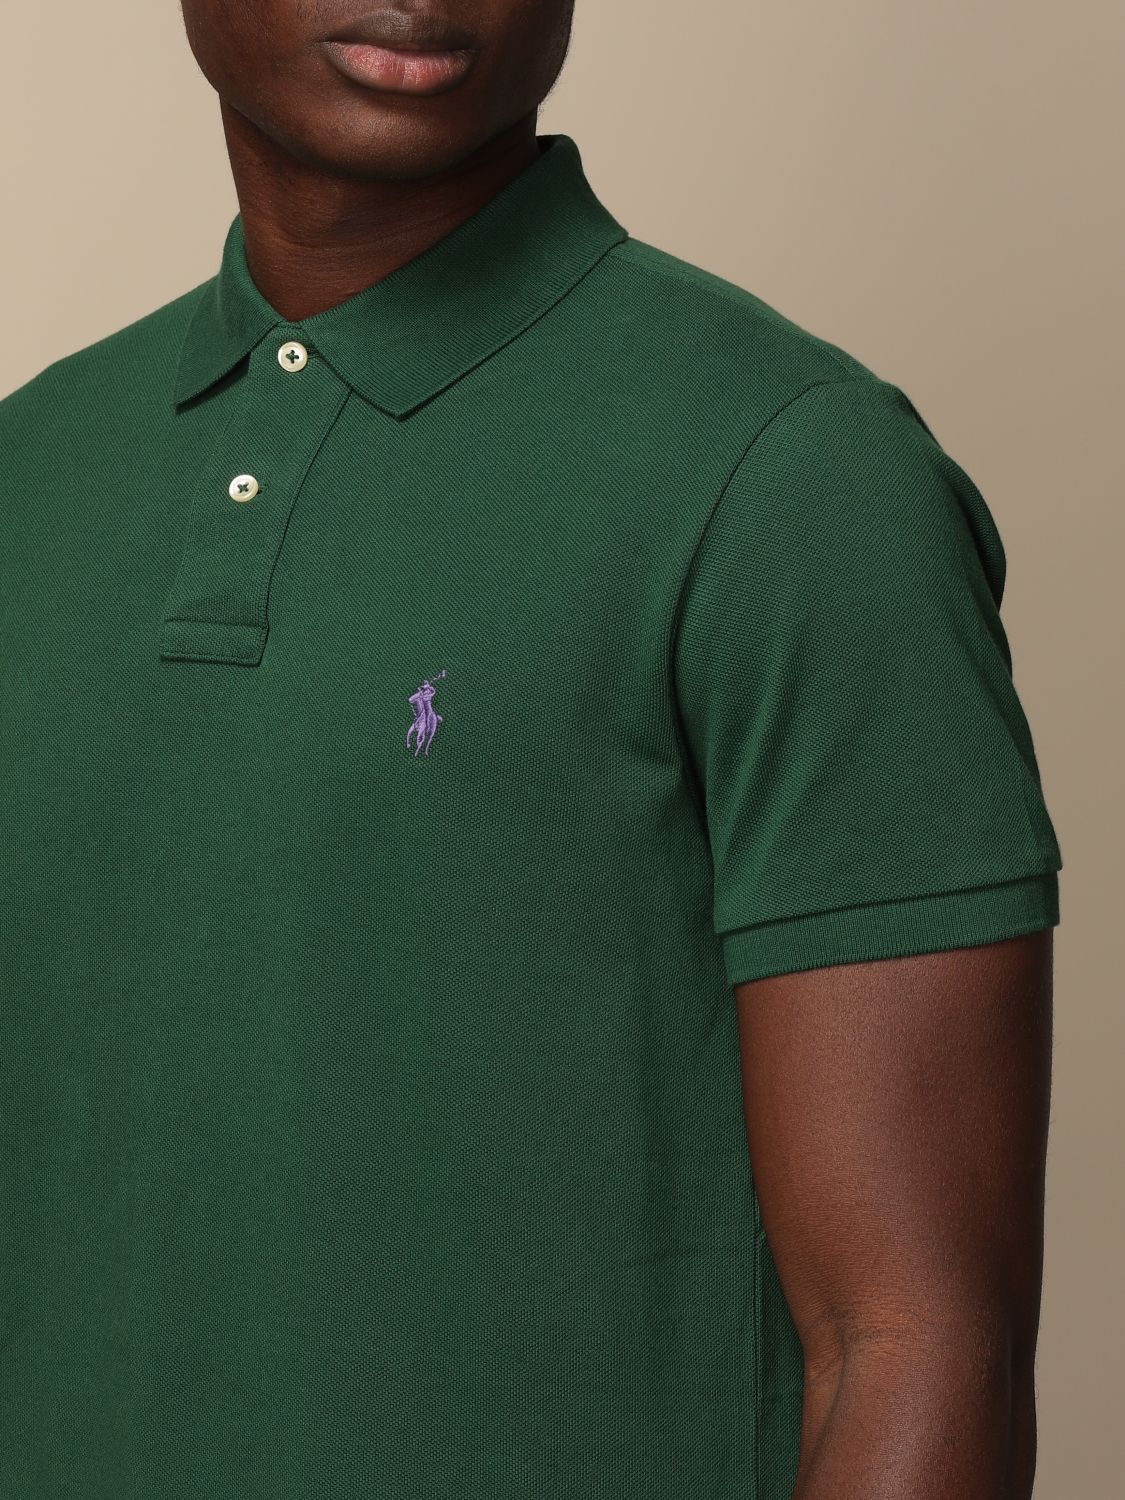 Polo Ralph Lauren Outlet: slim fit cotton polo shirt - Moss Green | Polo  Ralph Lauren polo shirt 710795080 online on 